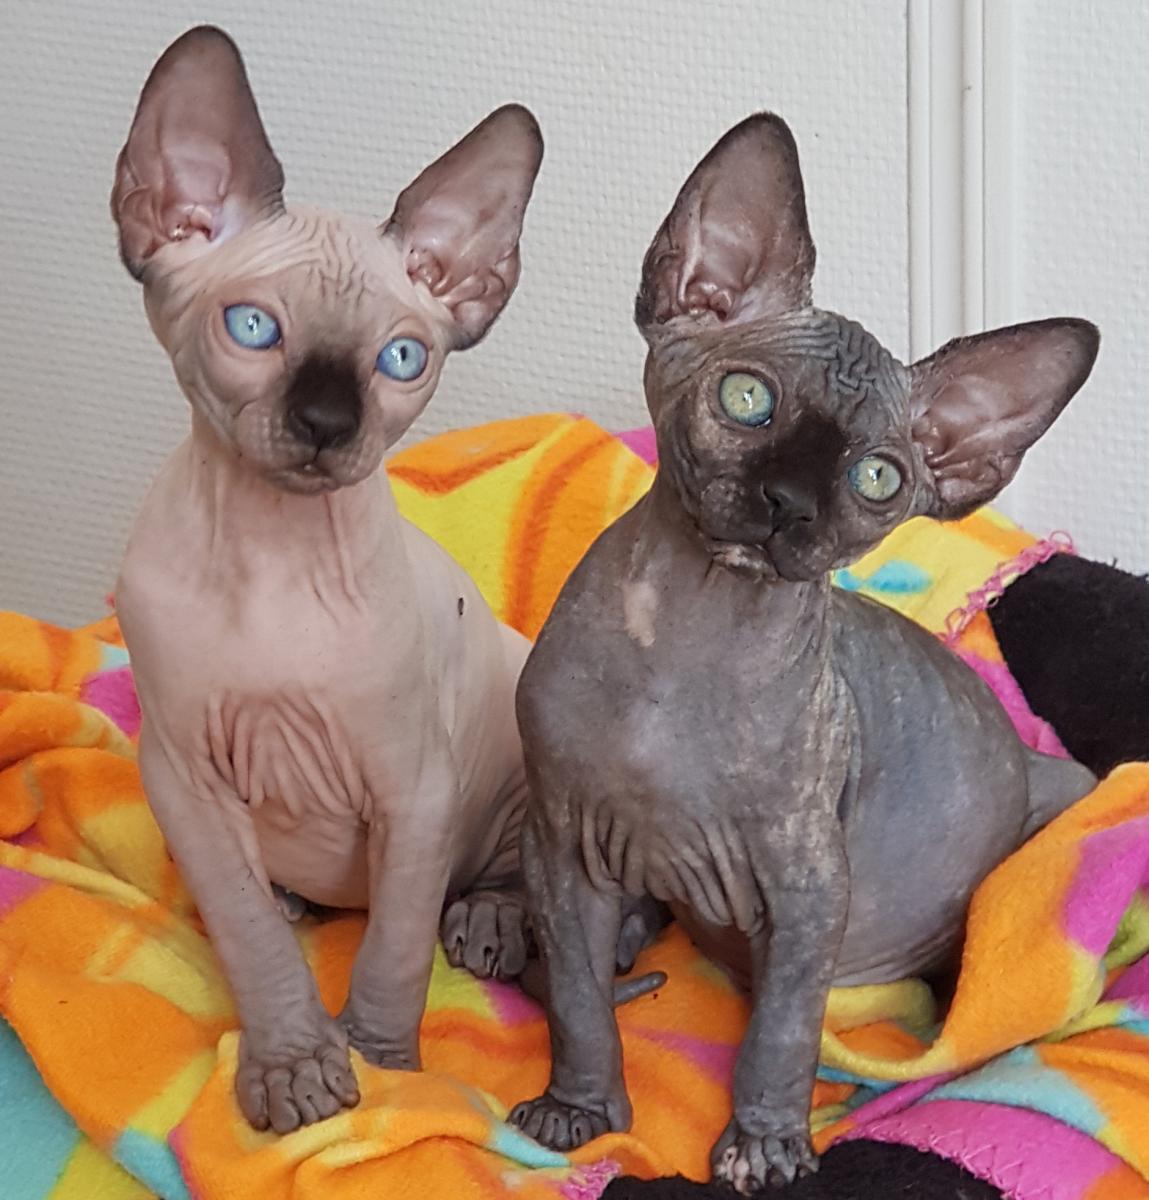 Race de chat : le Donskoy, Don hairless, Don sphynx, ou 